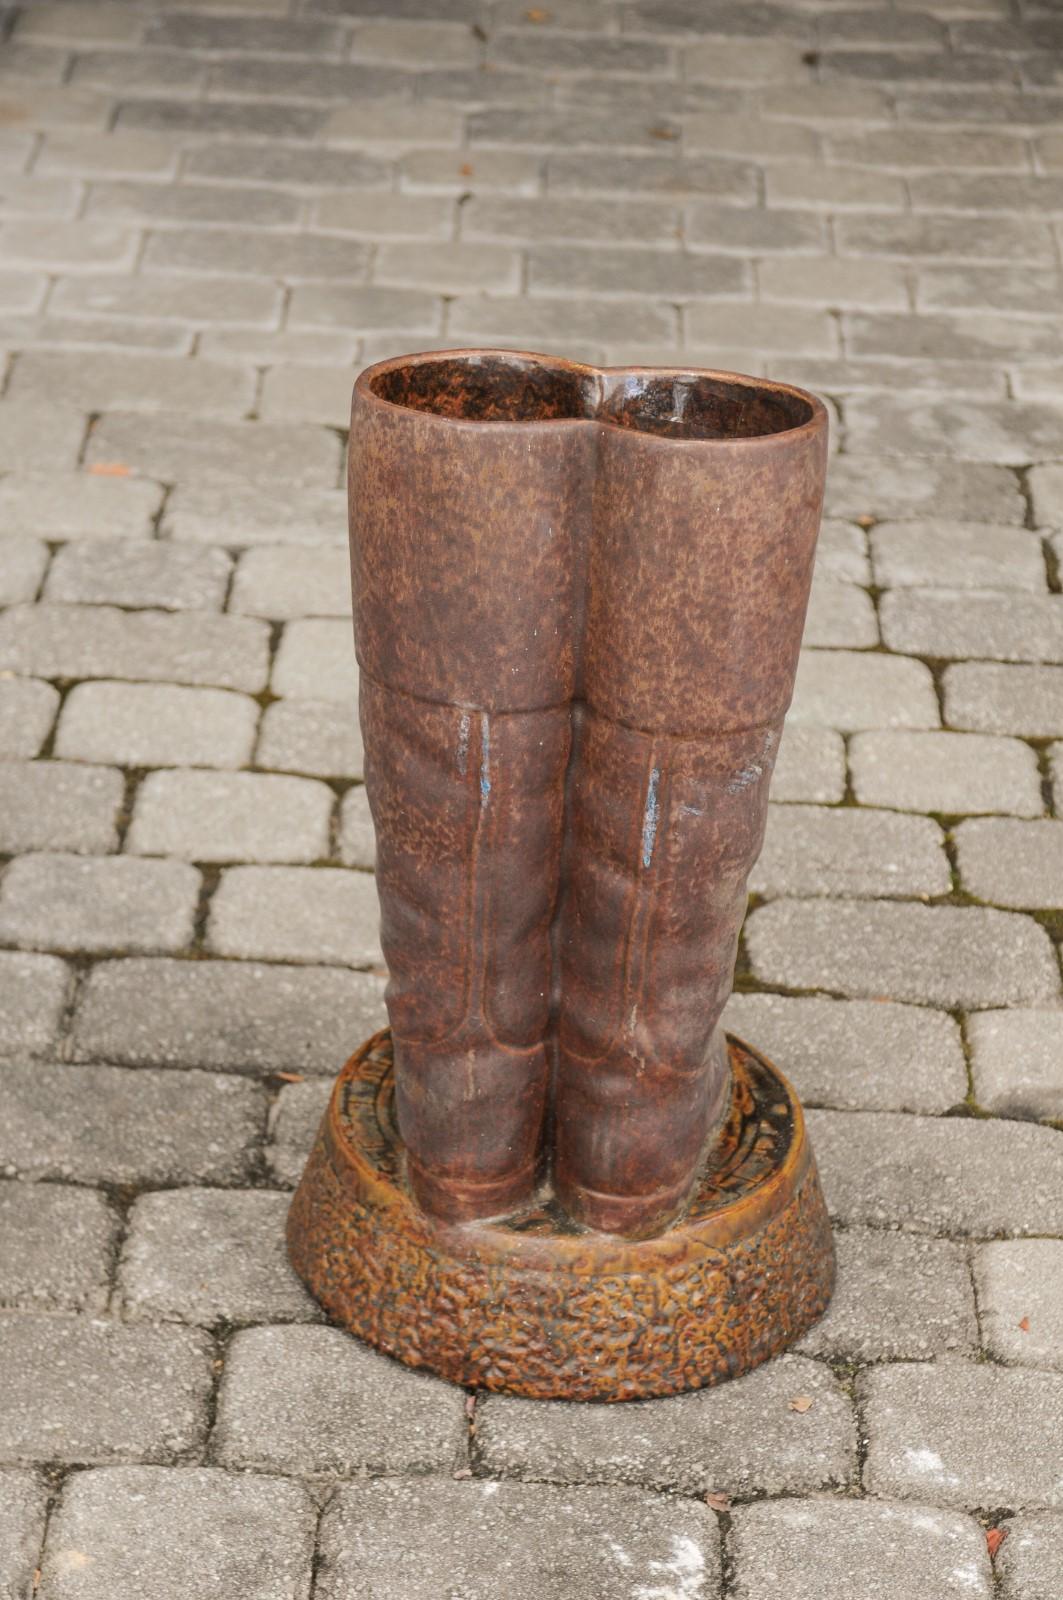 Contemporary Terracotta Umbrella Stand Depicting a Pair of Brown Riding Boots on Base